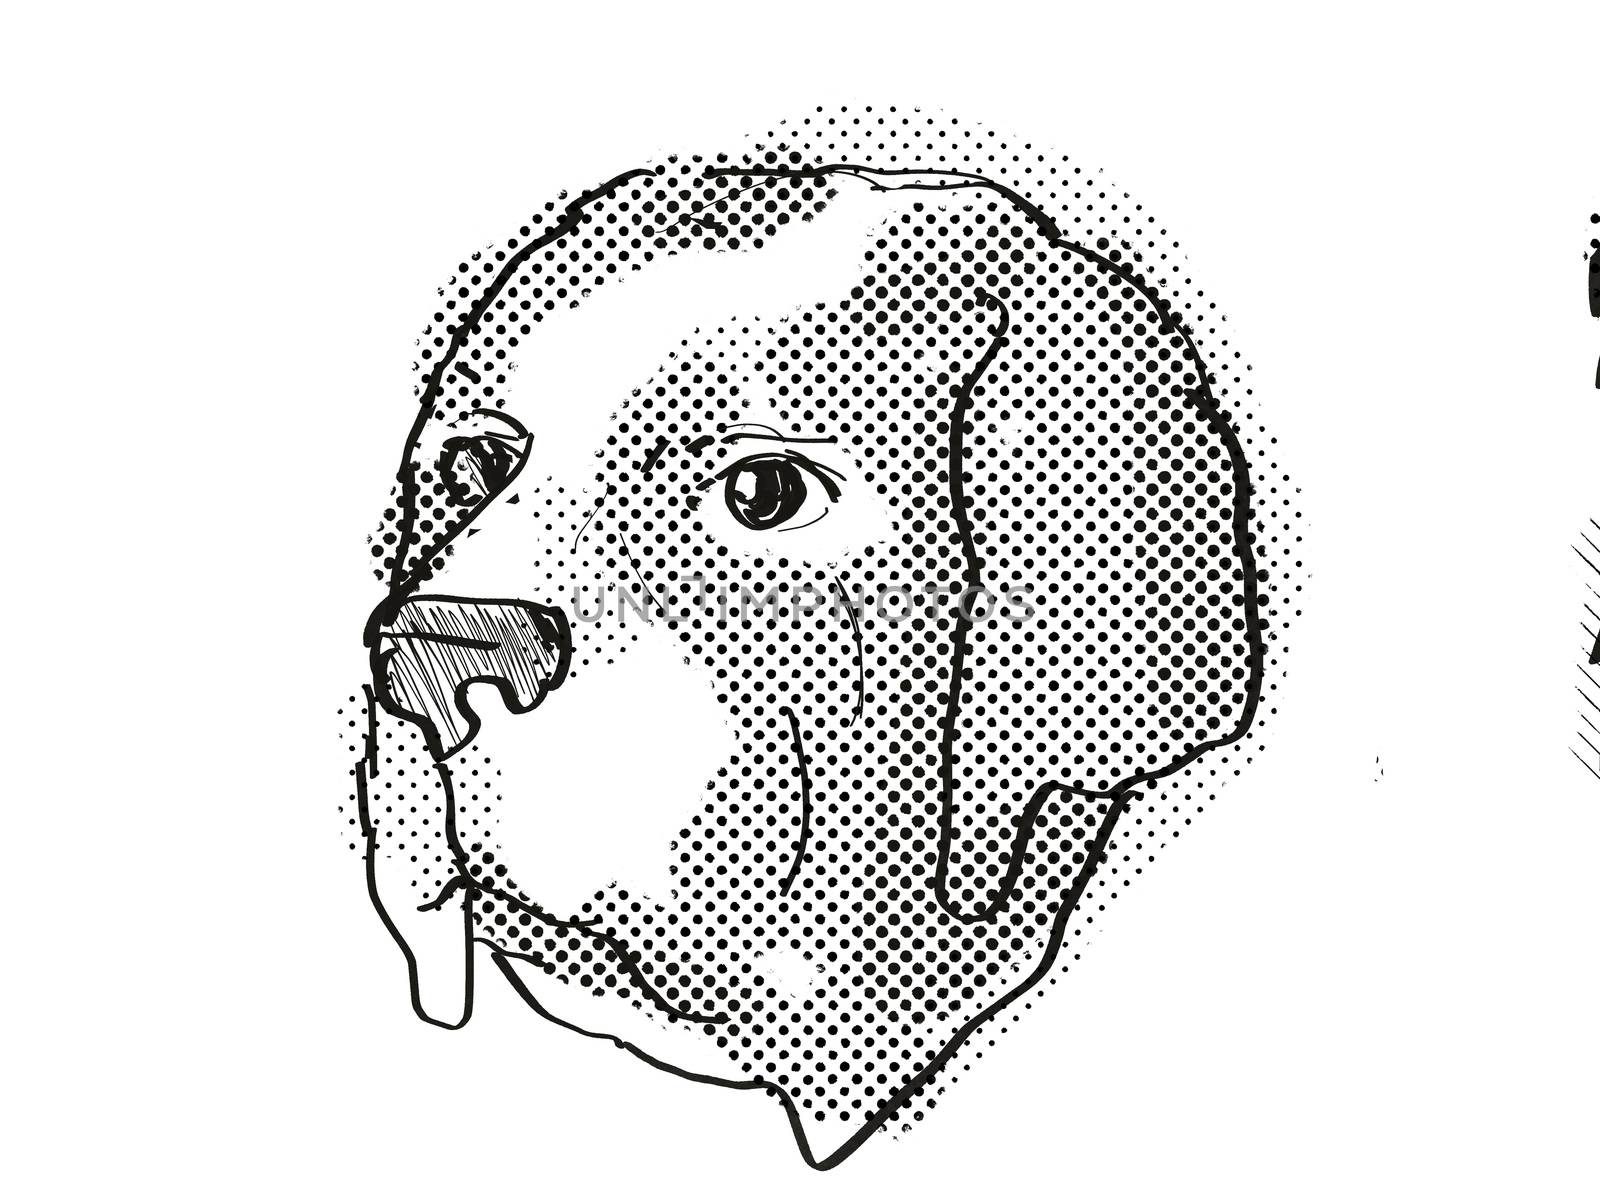 Retro cartoon style drawing of head of a Saint Bernard , a domestic dog or canine breed on isolated white background done in black and white.